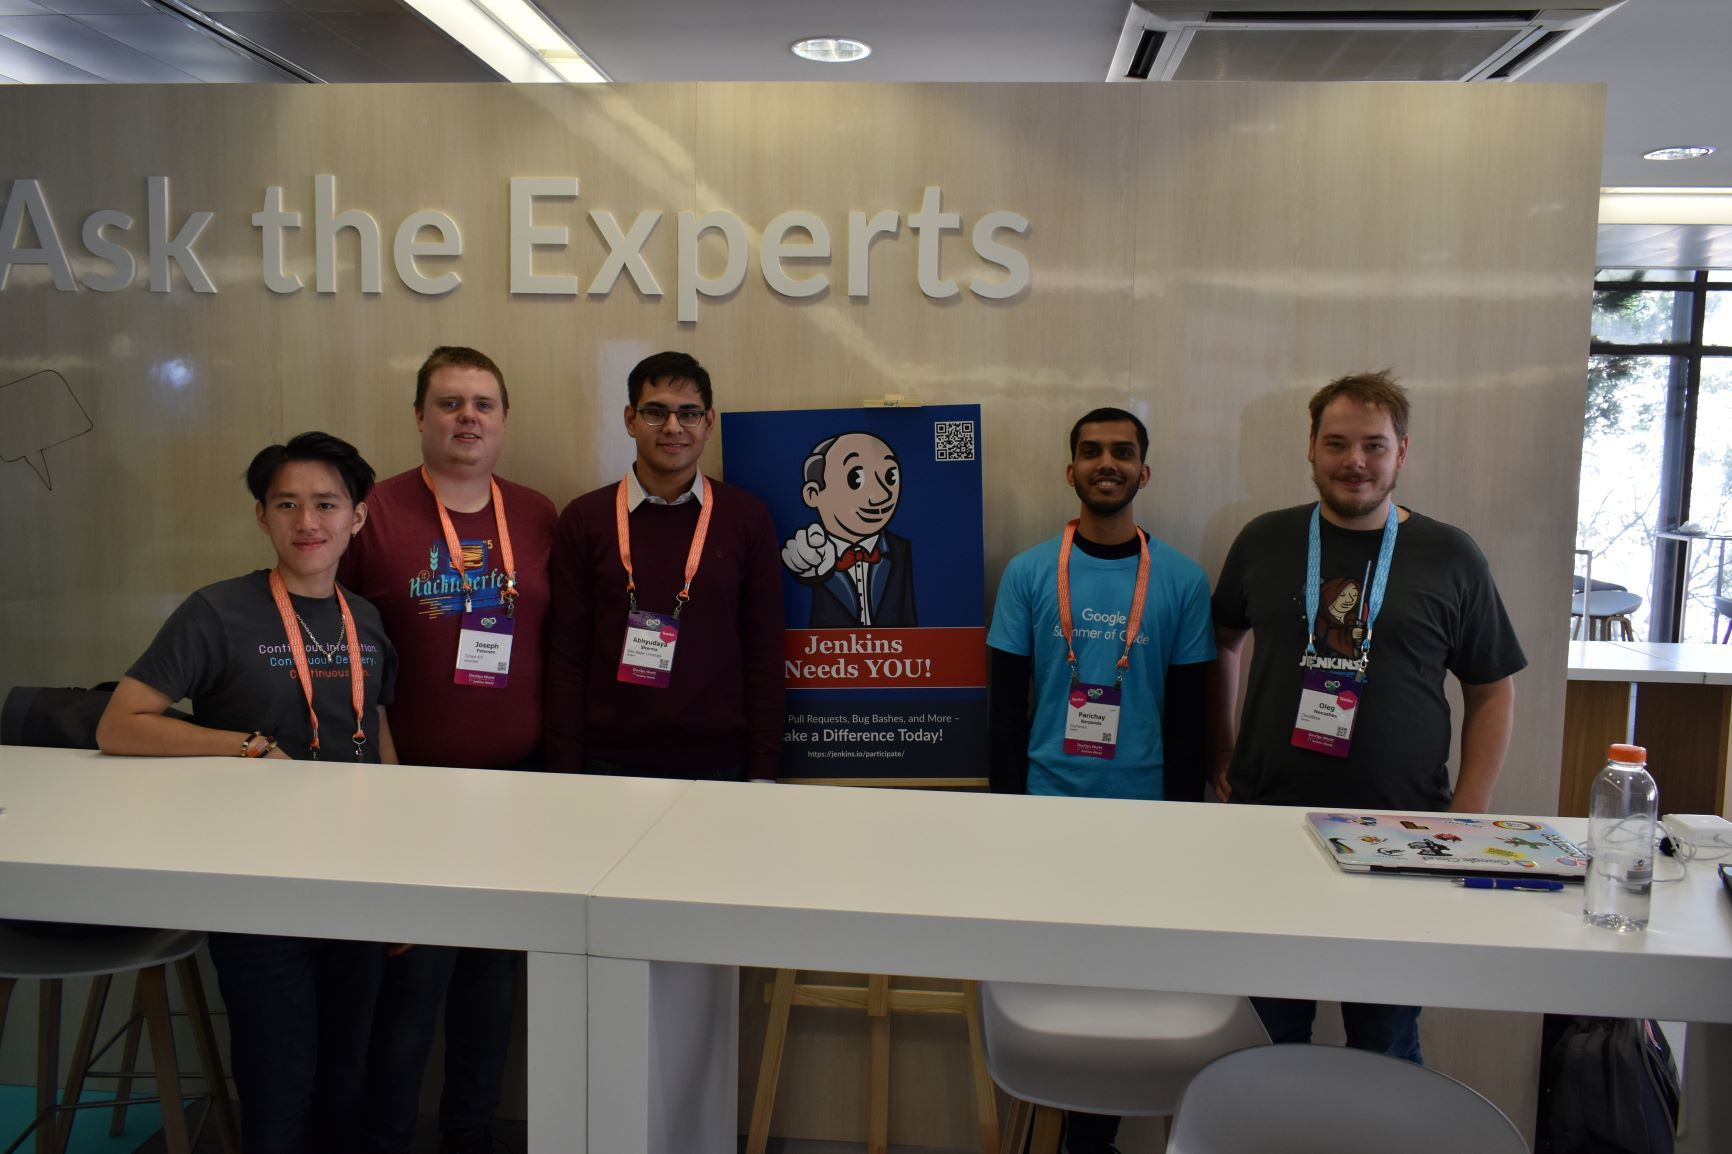 Jenkins World 2019 - Ask the experts